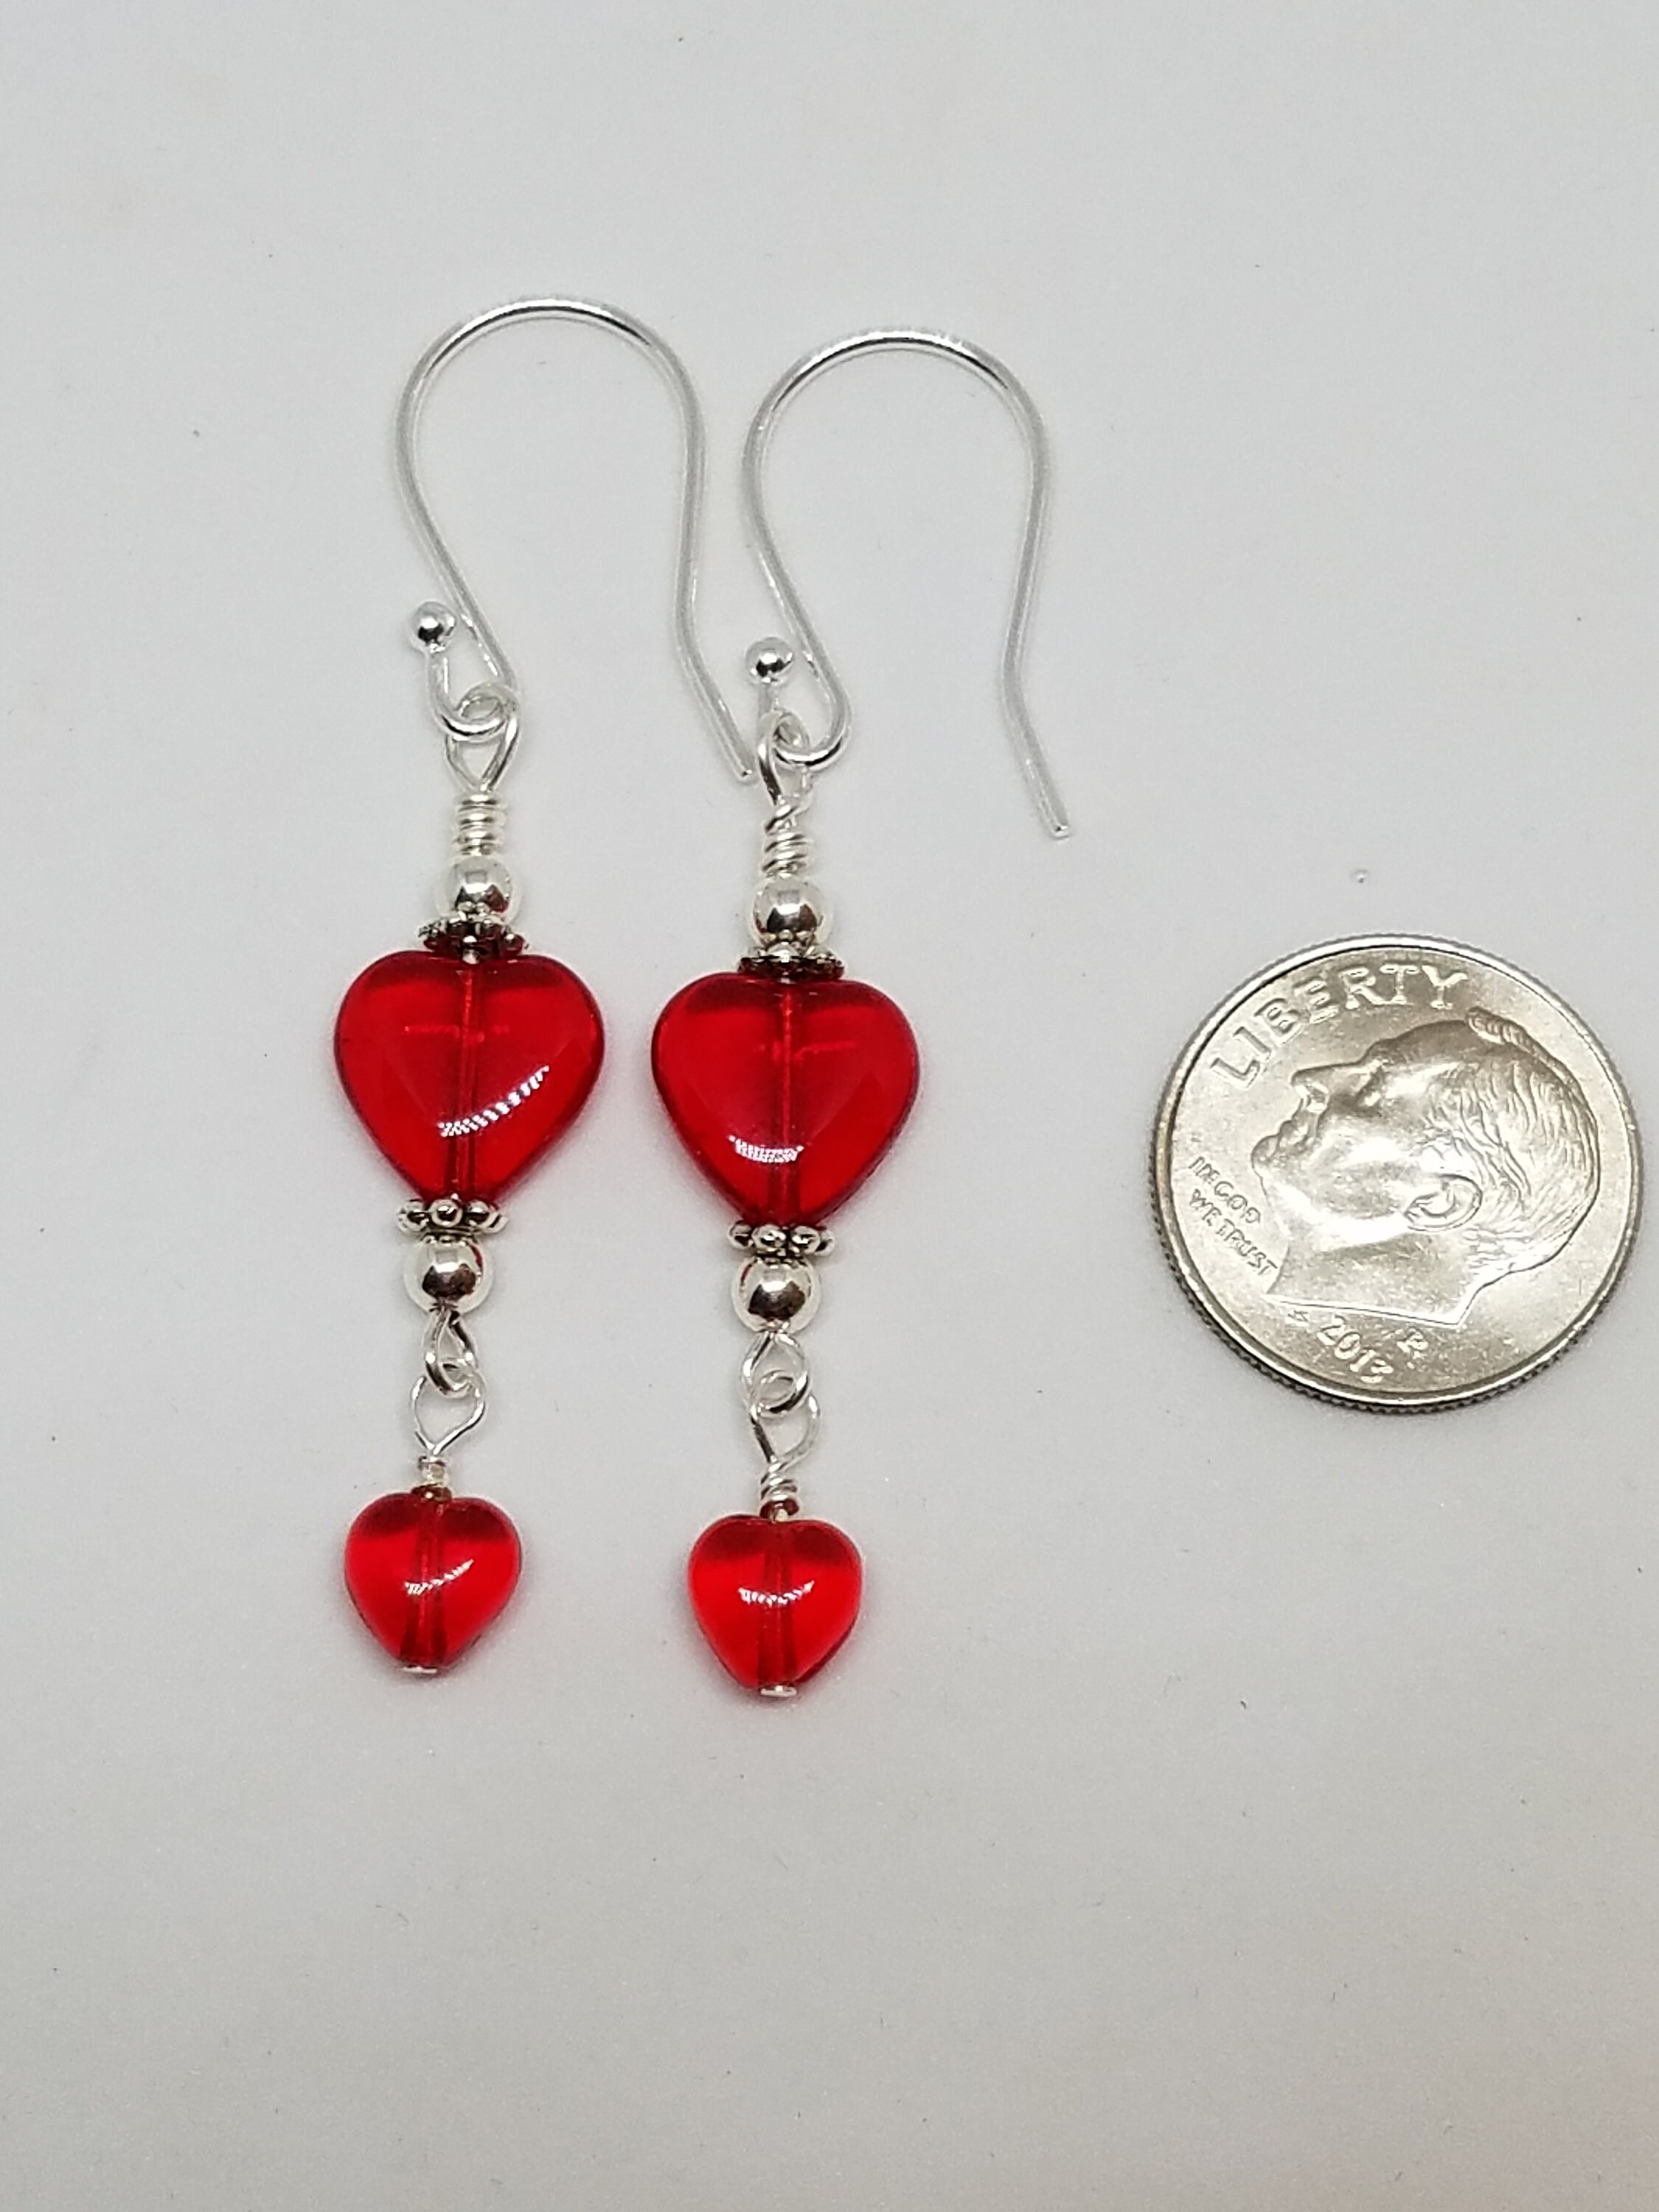 Red Heart Dangle Drop Earrings with Silver Plate Ear Wires | Etsy